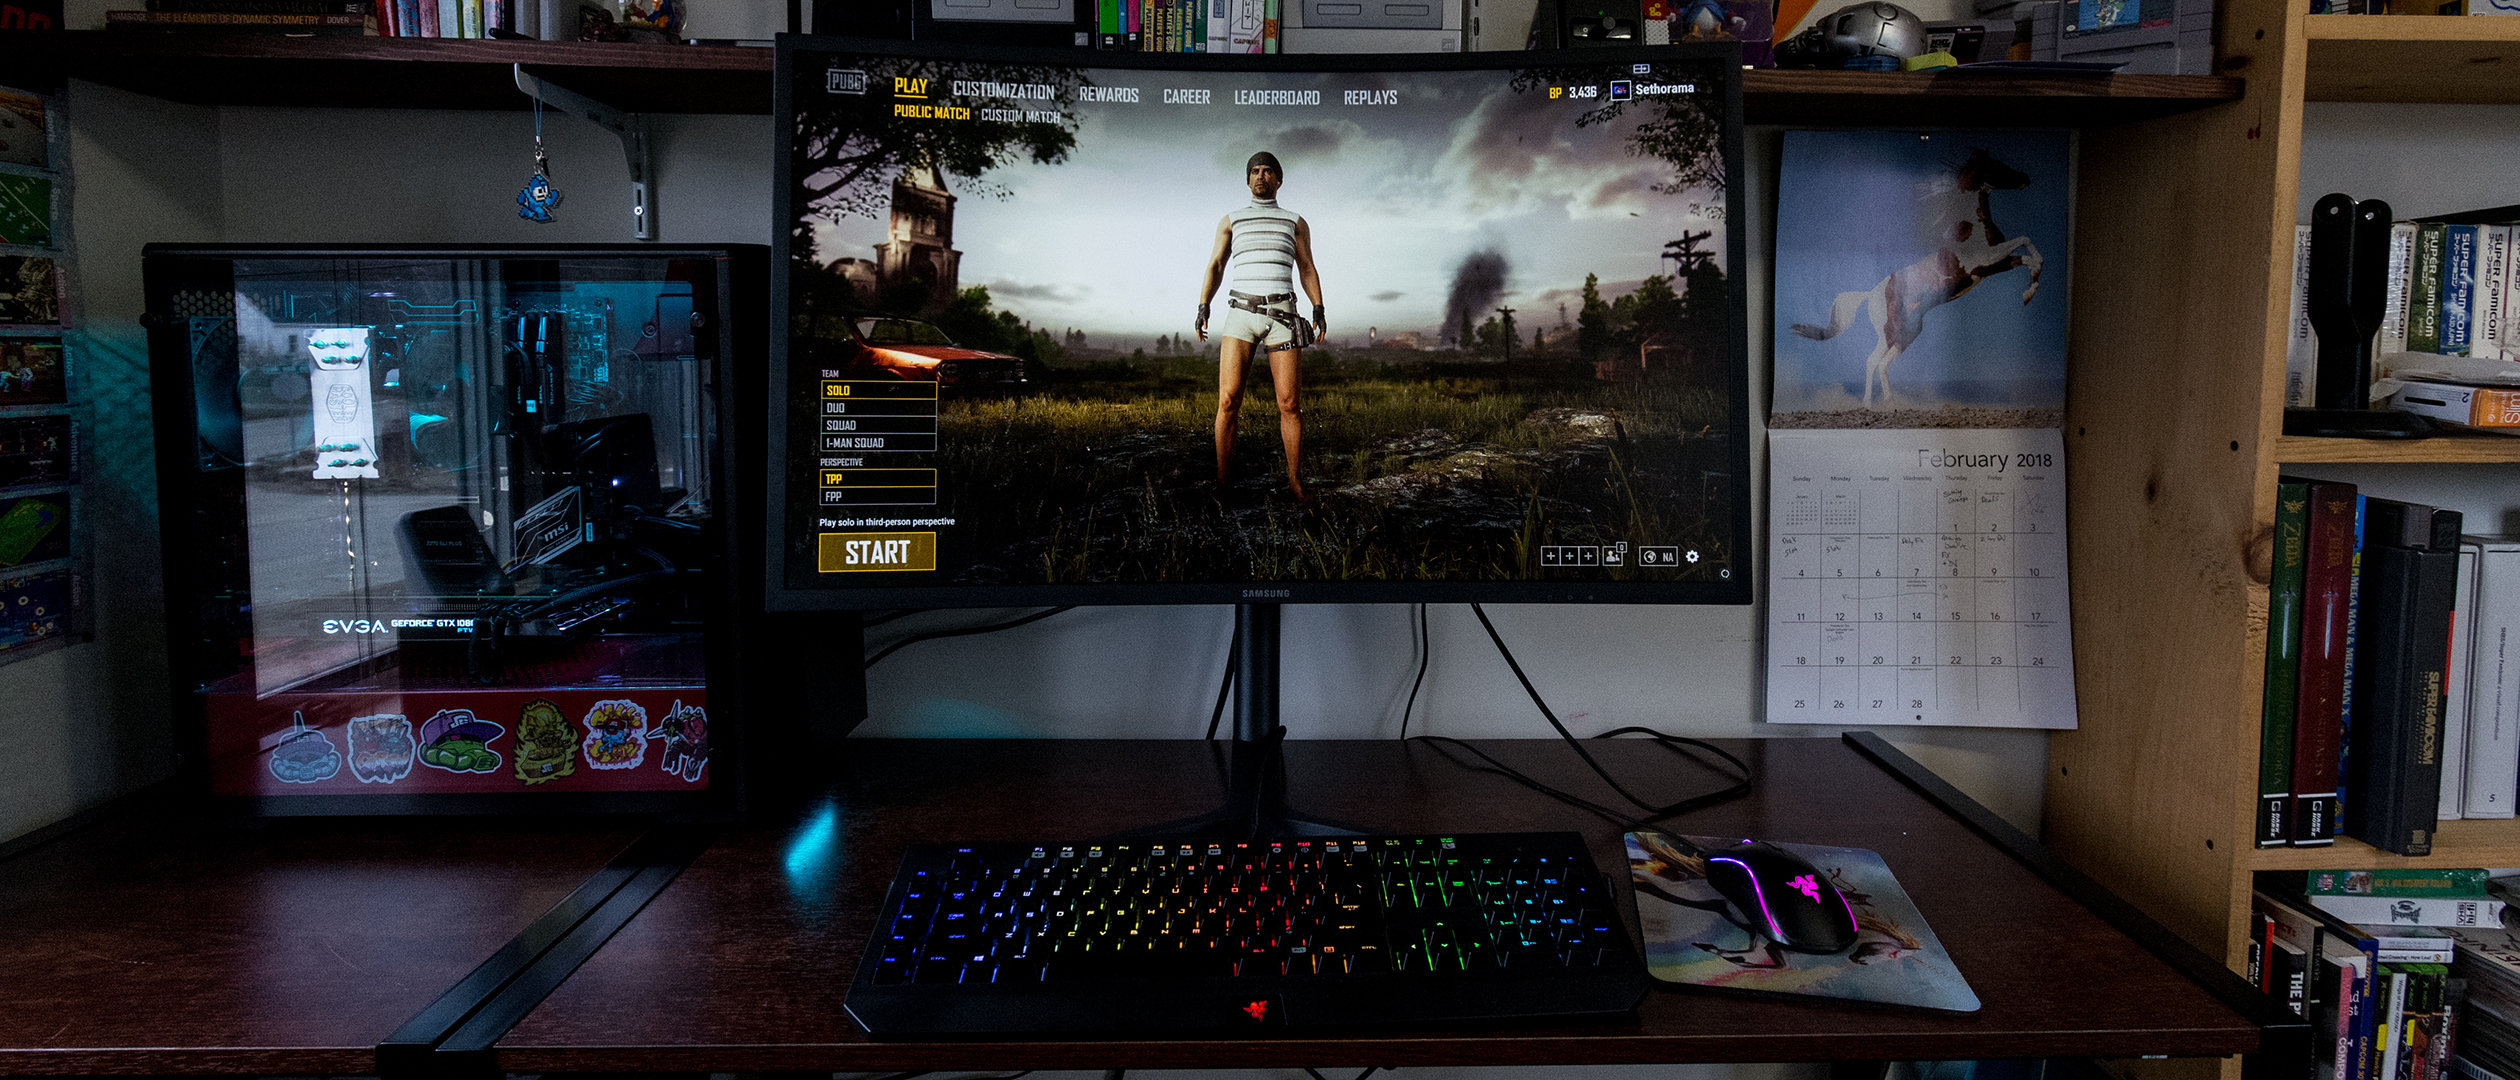 best gaming monitor